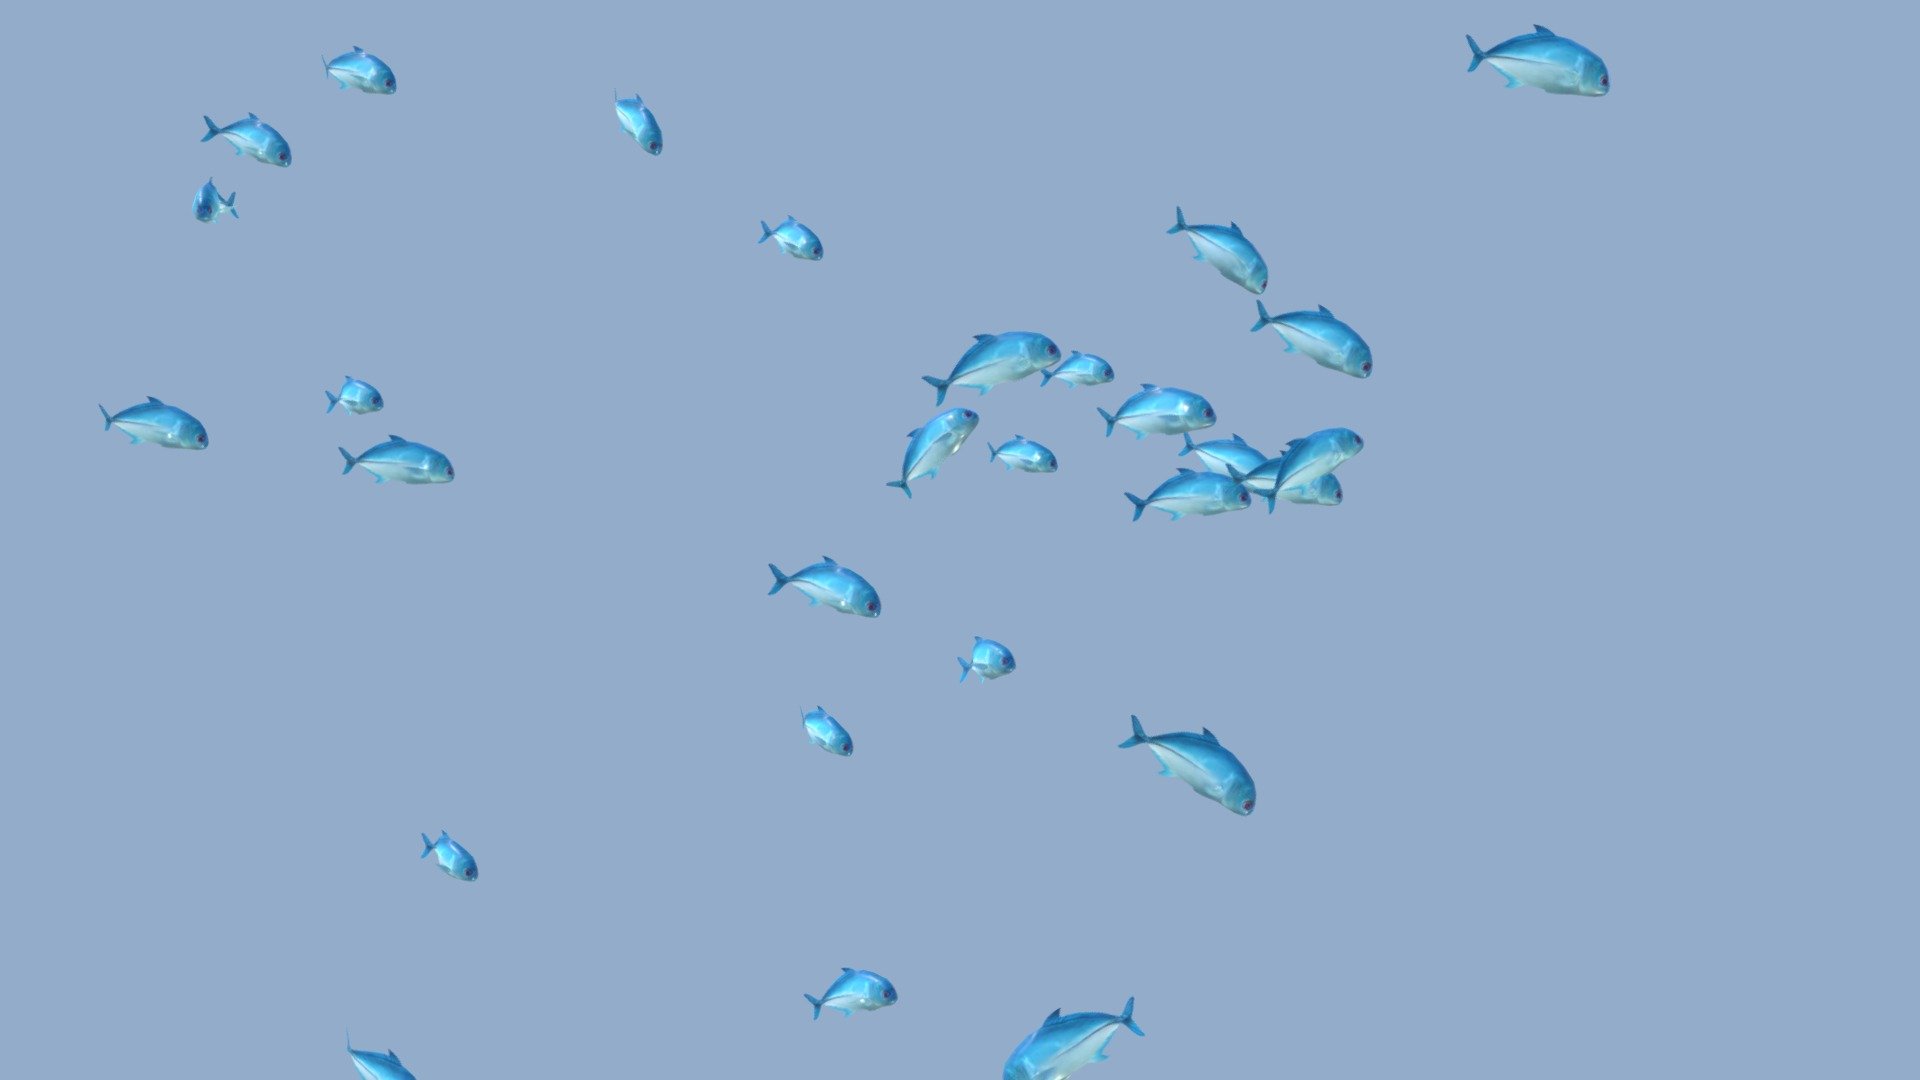 School of fish animated in a loop.

The school of fish contains 30 fish. 

The fish created in Maya. 

All Fish Animated in the loop duration 36 sec.



This is a 2.0 version

this SchoolingFish has the following changes:

1. There are include two new type of textures (Normal, Metallic).

2. Increased texture resolution to 1024 x 1024 px.

3. Redesigned rig. Added root a bone in each fish-rig. Changes have been made to the Scale Settings of bones. This led to involuntary deformations of the mesh.



If for some reason you do not have these changes, please email me 3d model